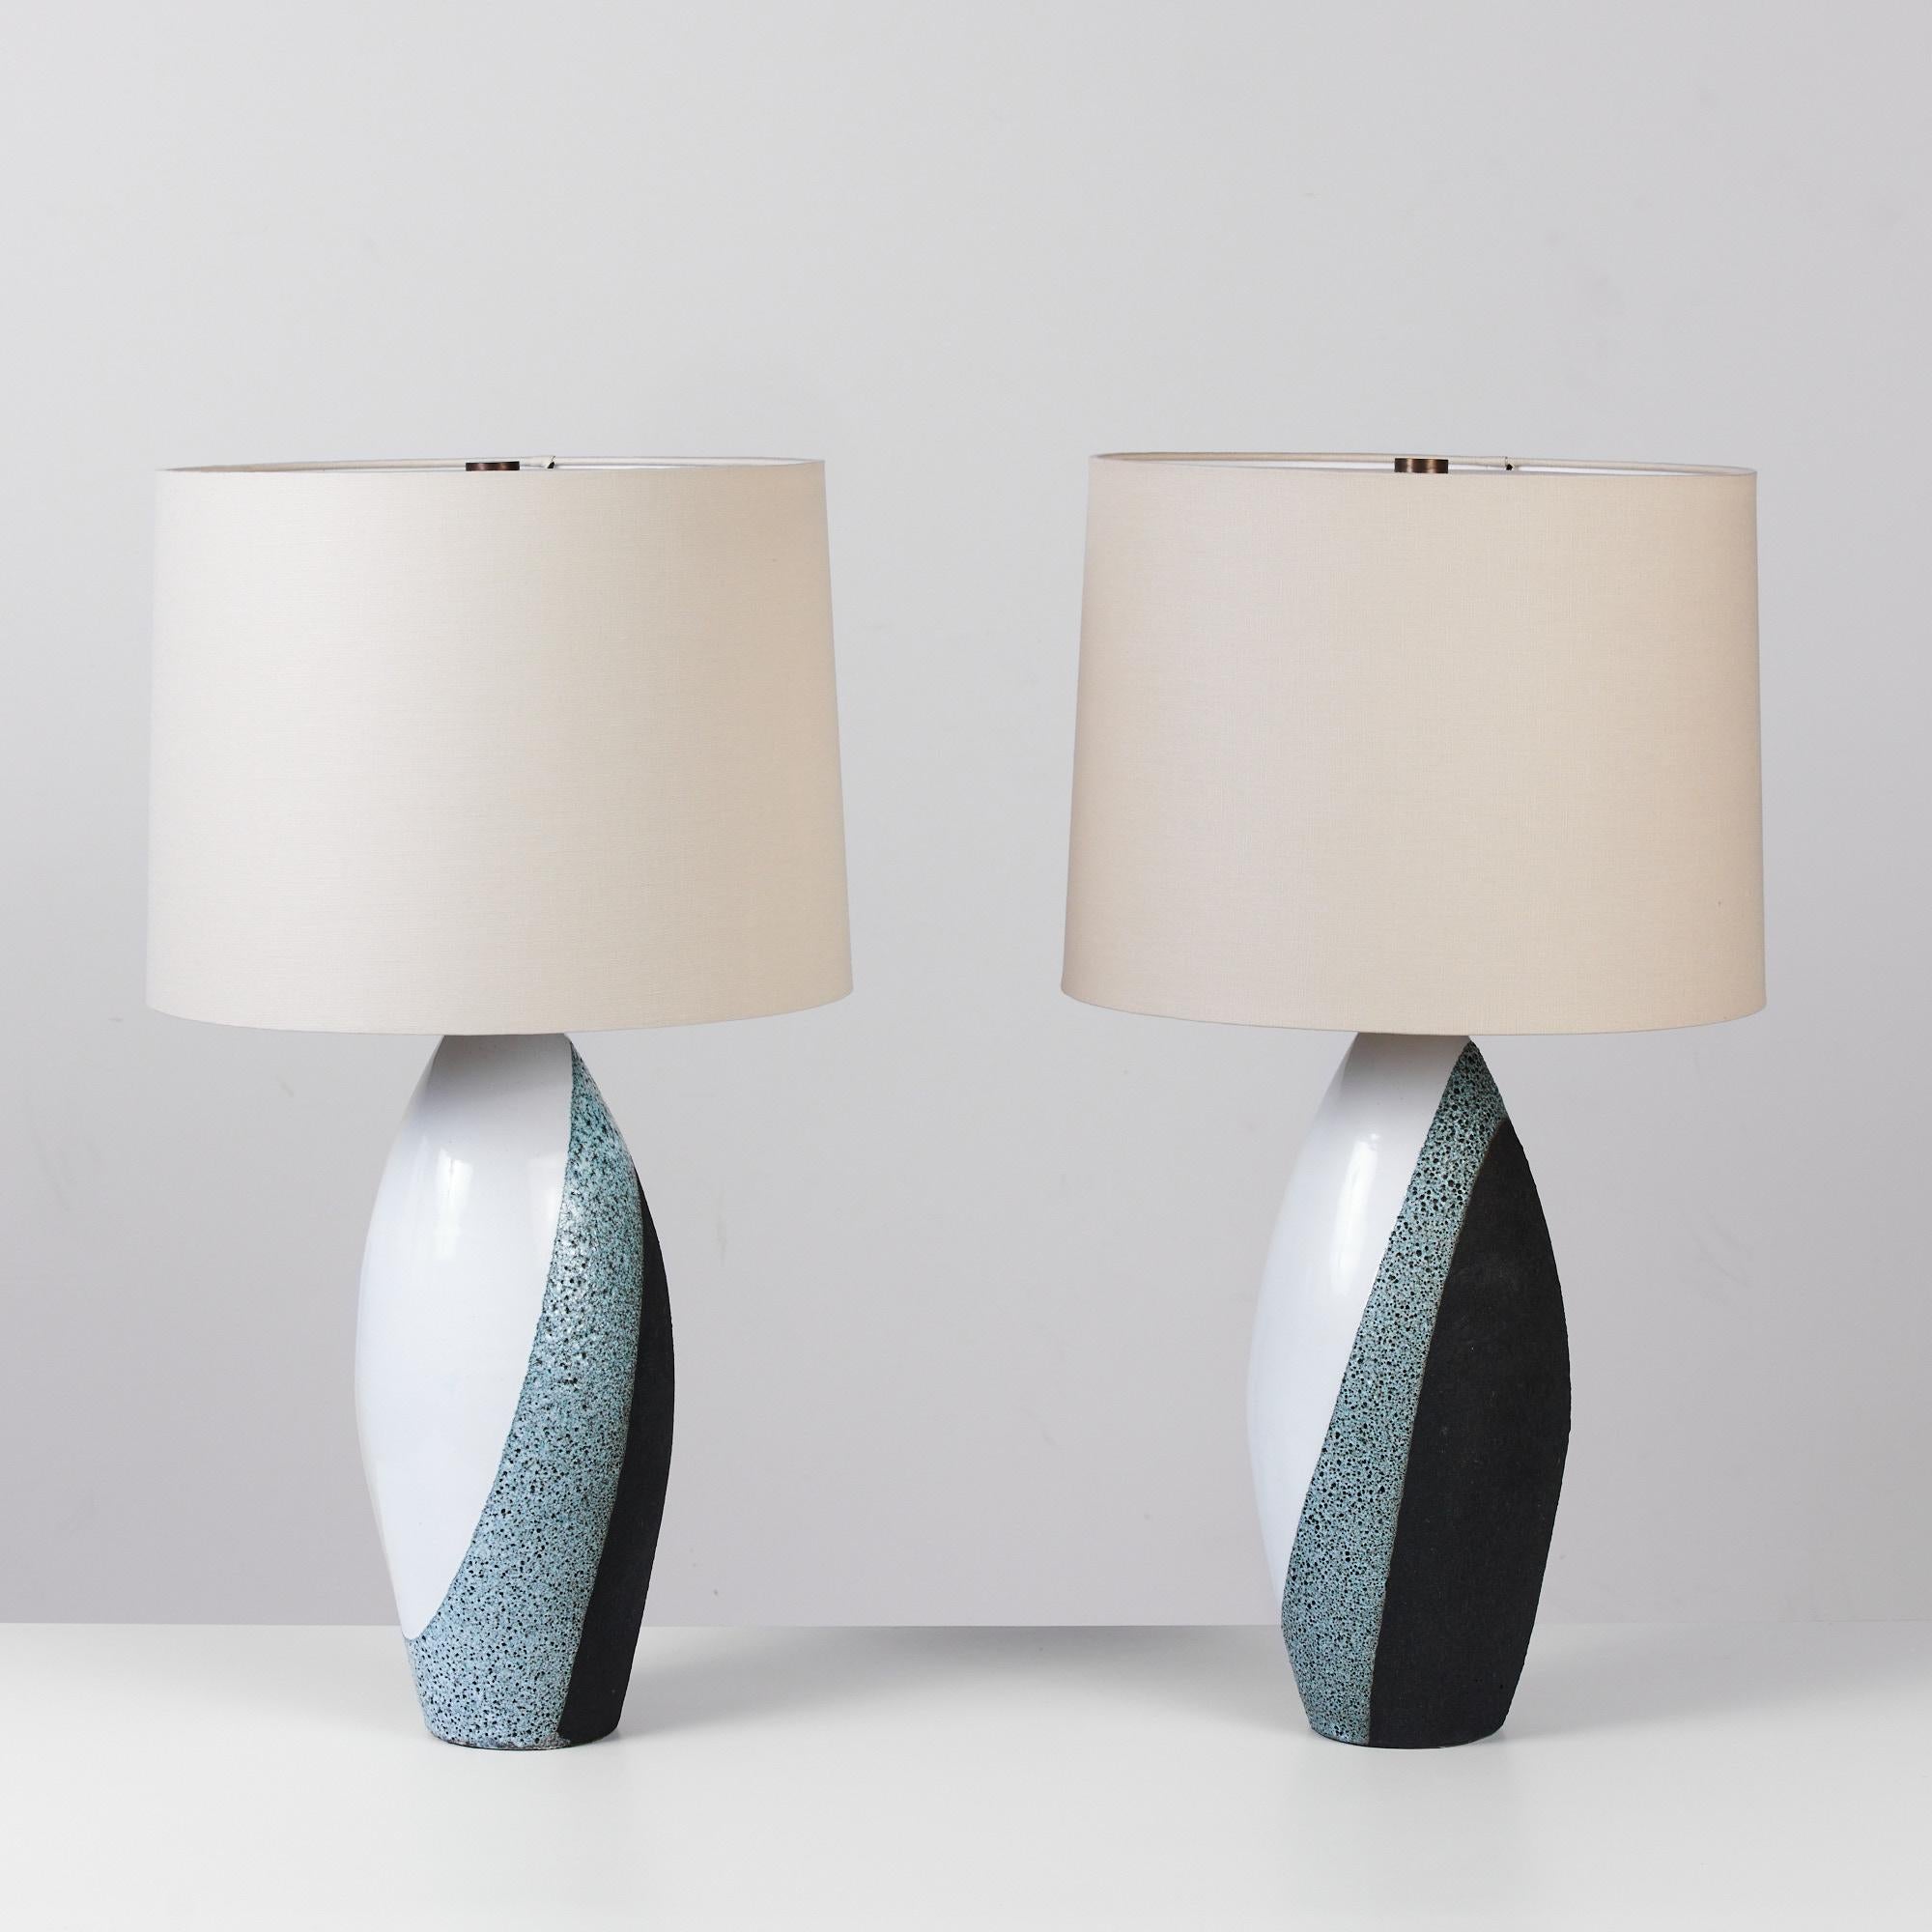 Pair of Ettore Sottsass for Bitossi Glazed Ceramic Lamps In Excellent Condition For Sale In Los Angeles, CA